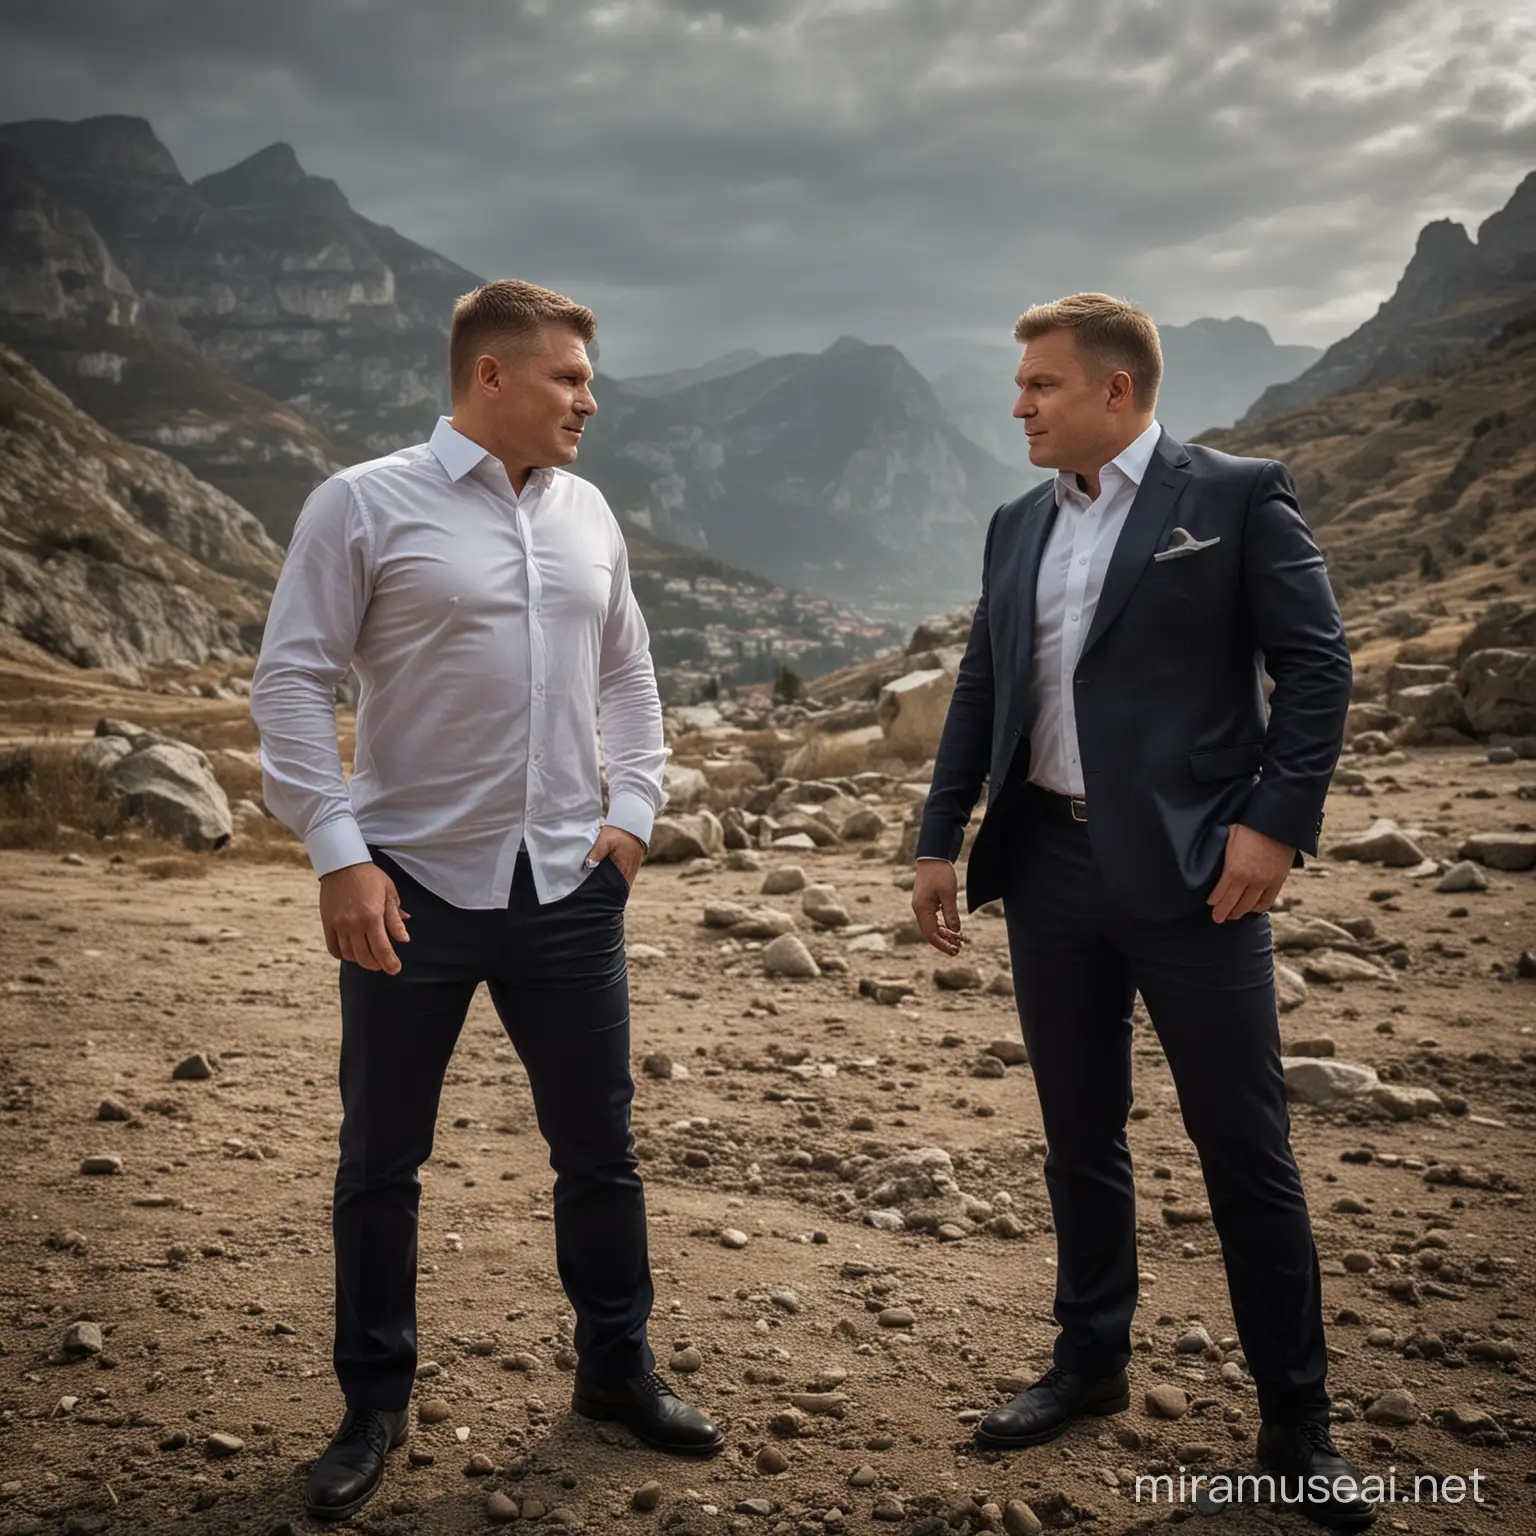 As a Slovak photographer produce a photo that describes relationship between Robert fico and Peter Pellegrini 